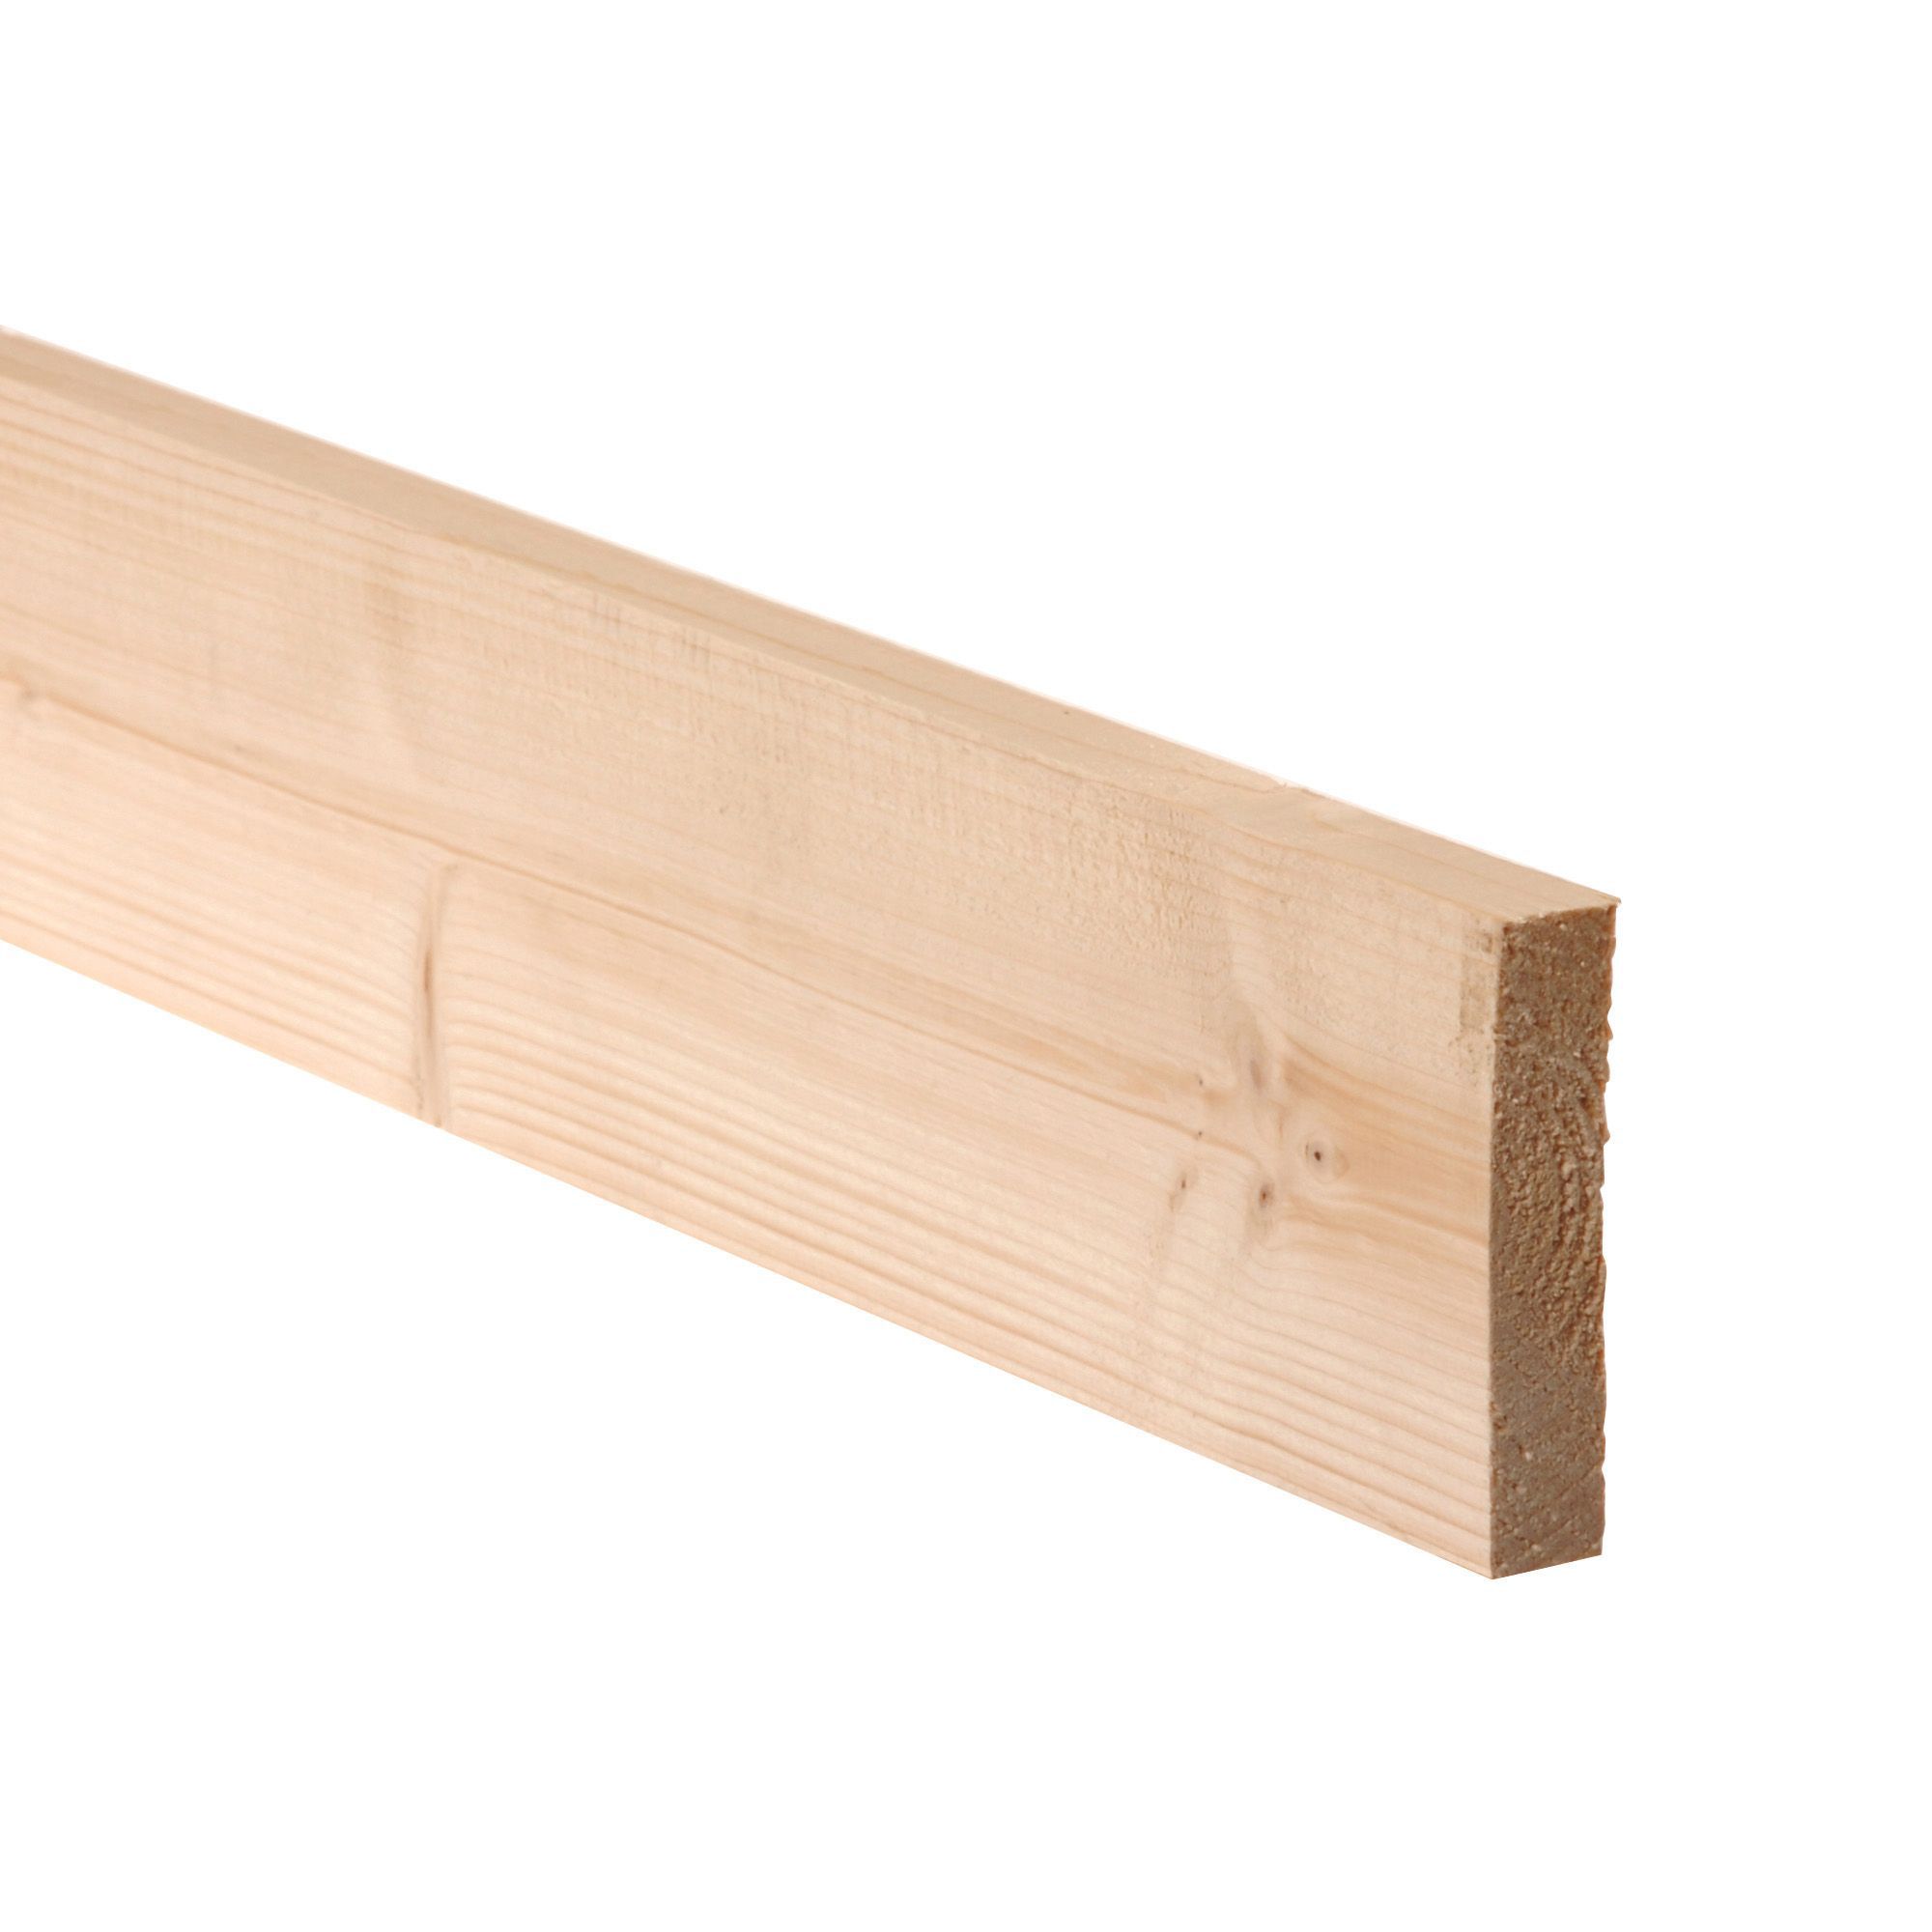 Smooth Planed Square edge Spruce Timber (L)1.8m (W)70mm (T)18mm 253270, Pack of 12